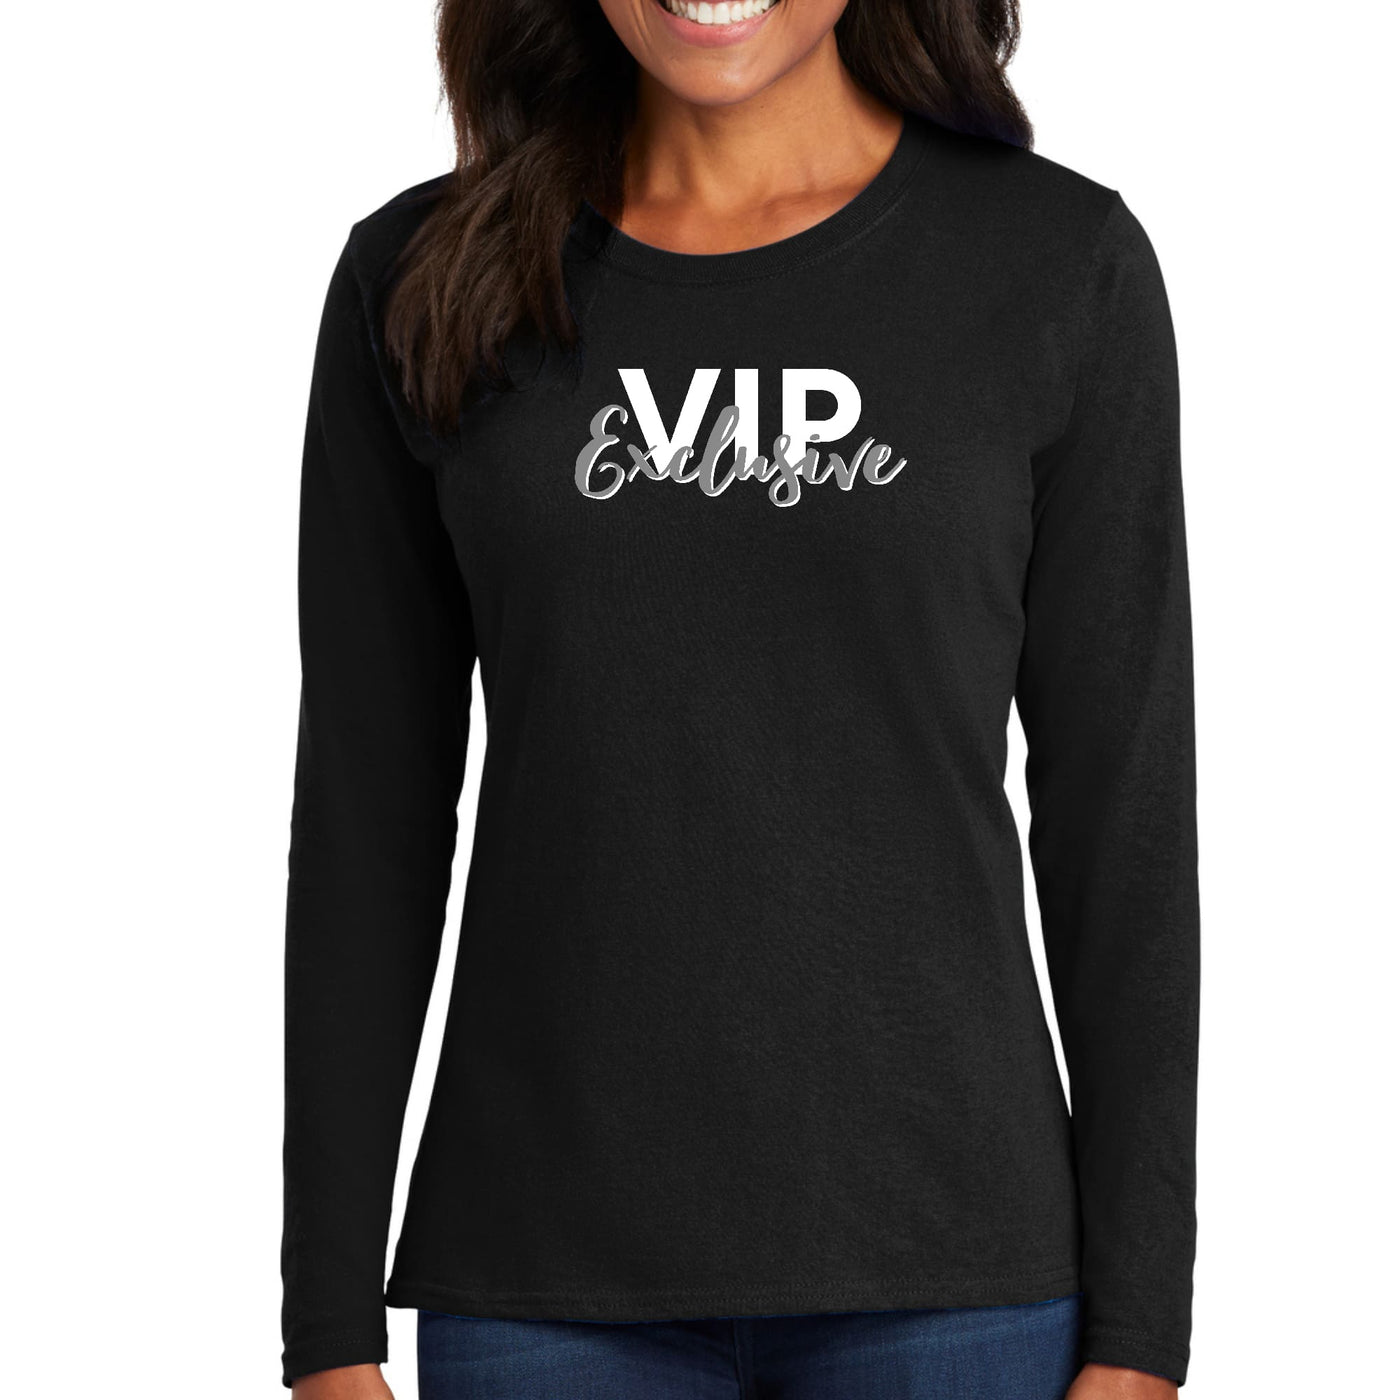 Womens Long Sleeve Graphic T-shirt Vip Exclusive Grey And White - Womens